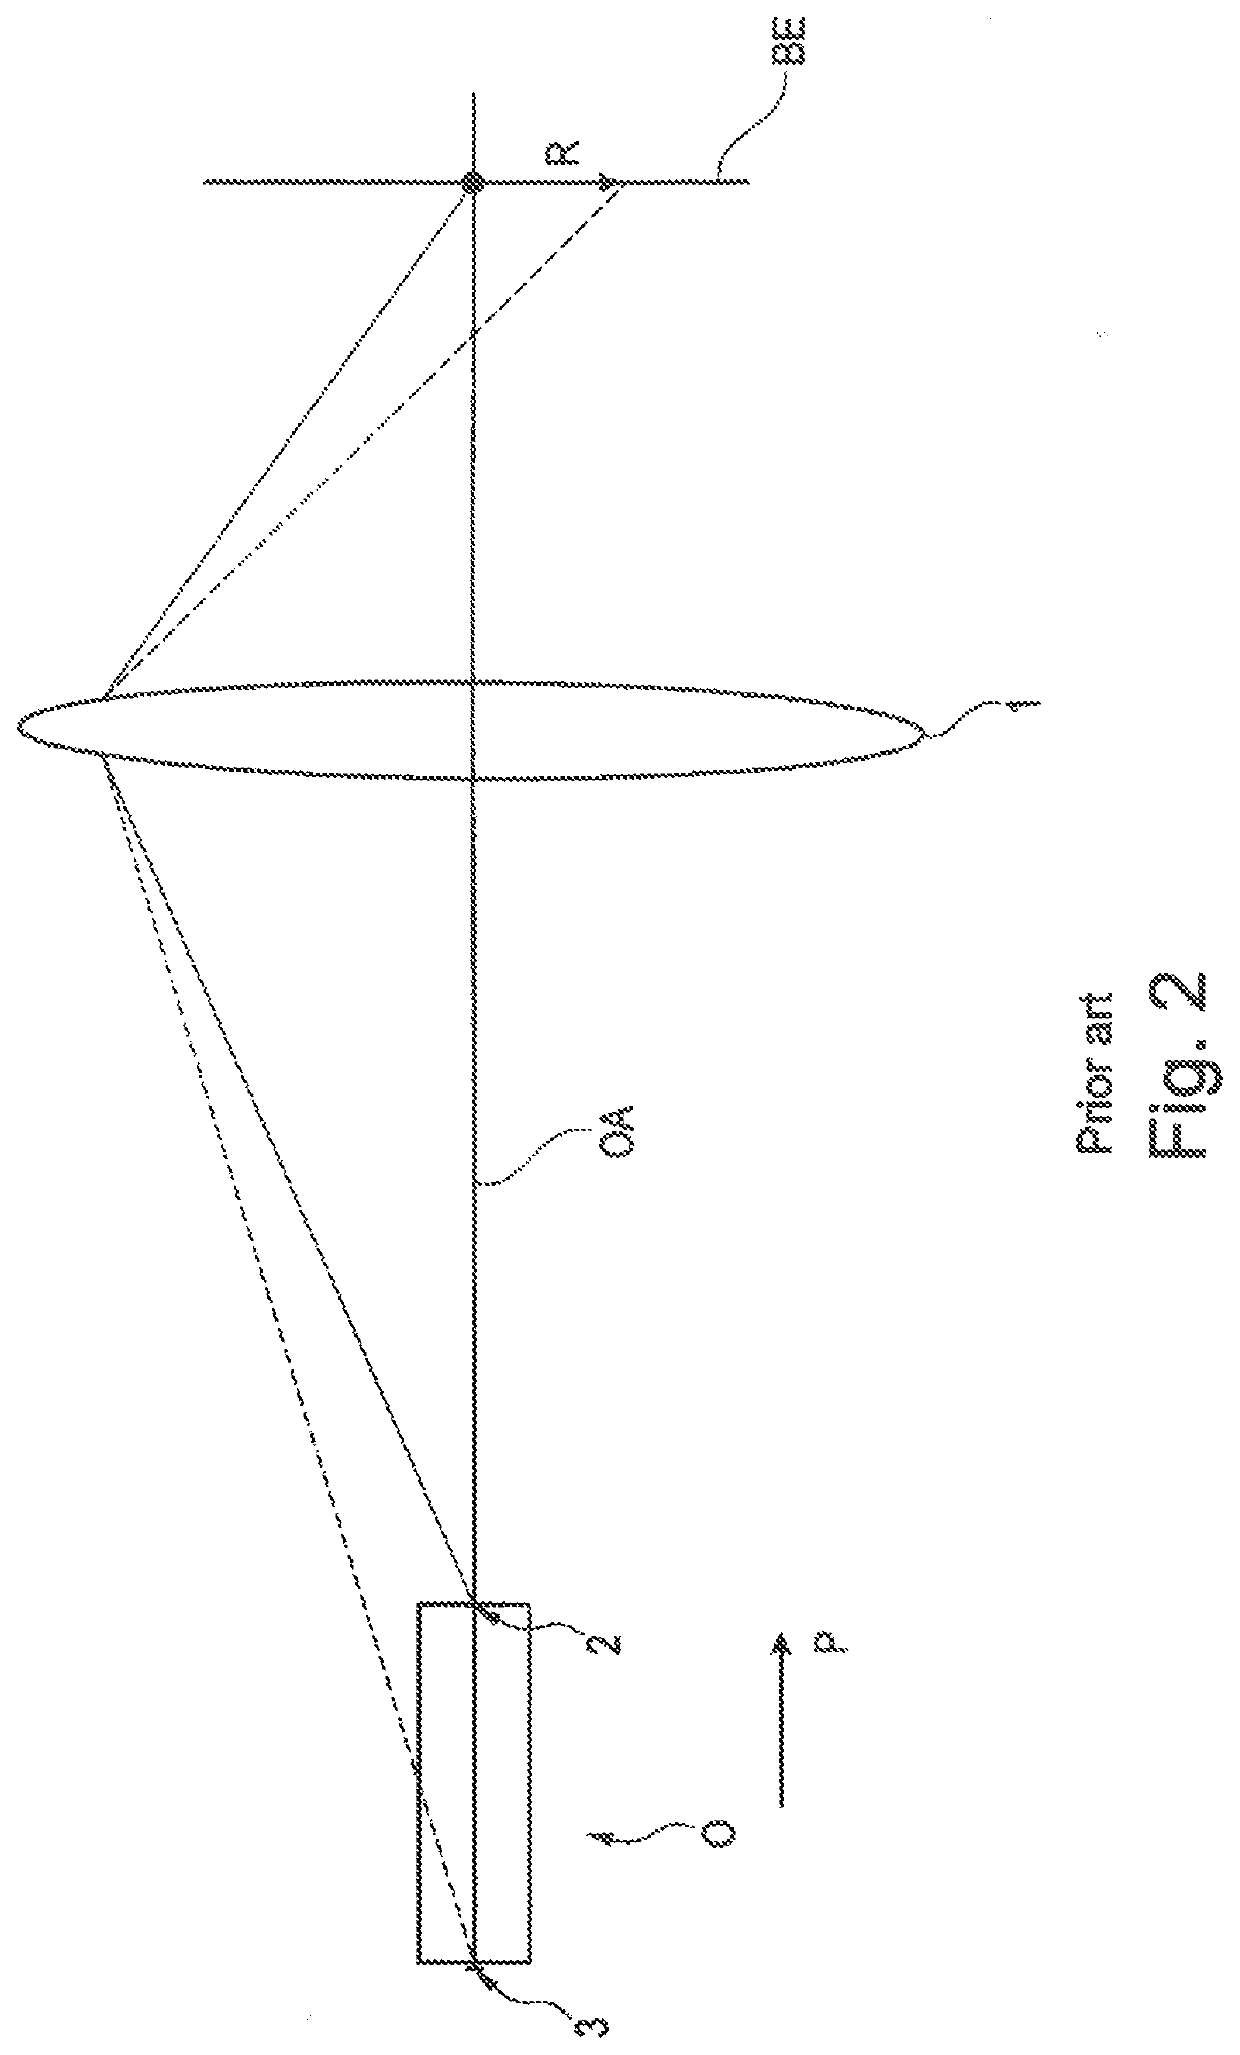 Method for adjusting and visualizing parameters for focusing an objective lens on an object and system for implementing the method